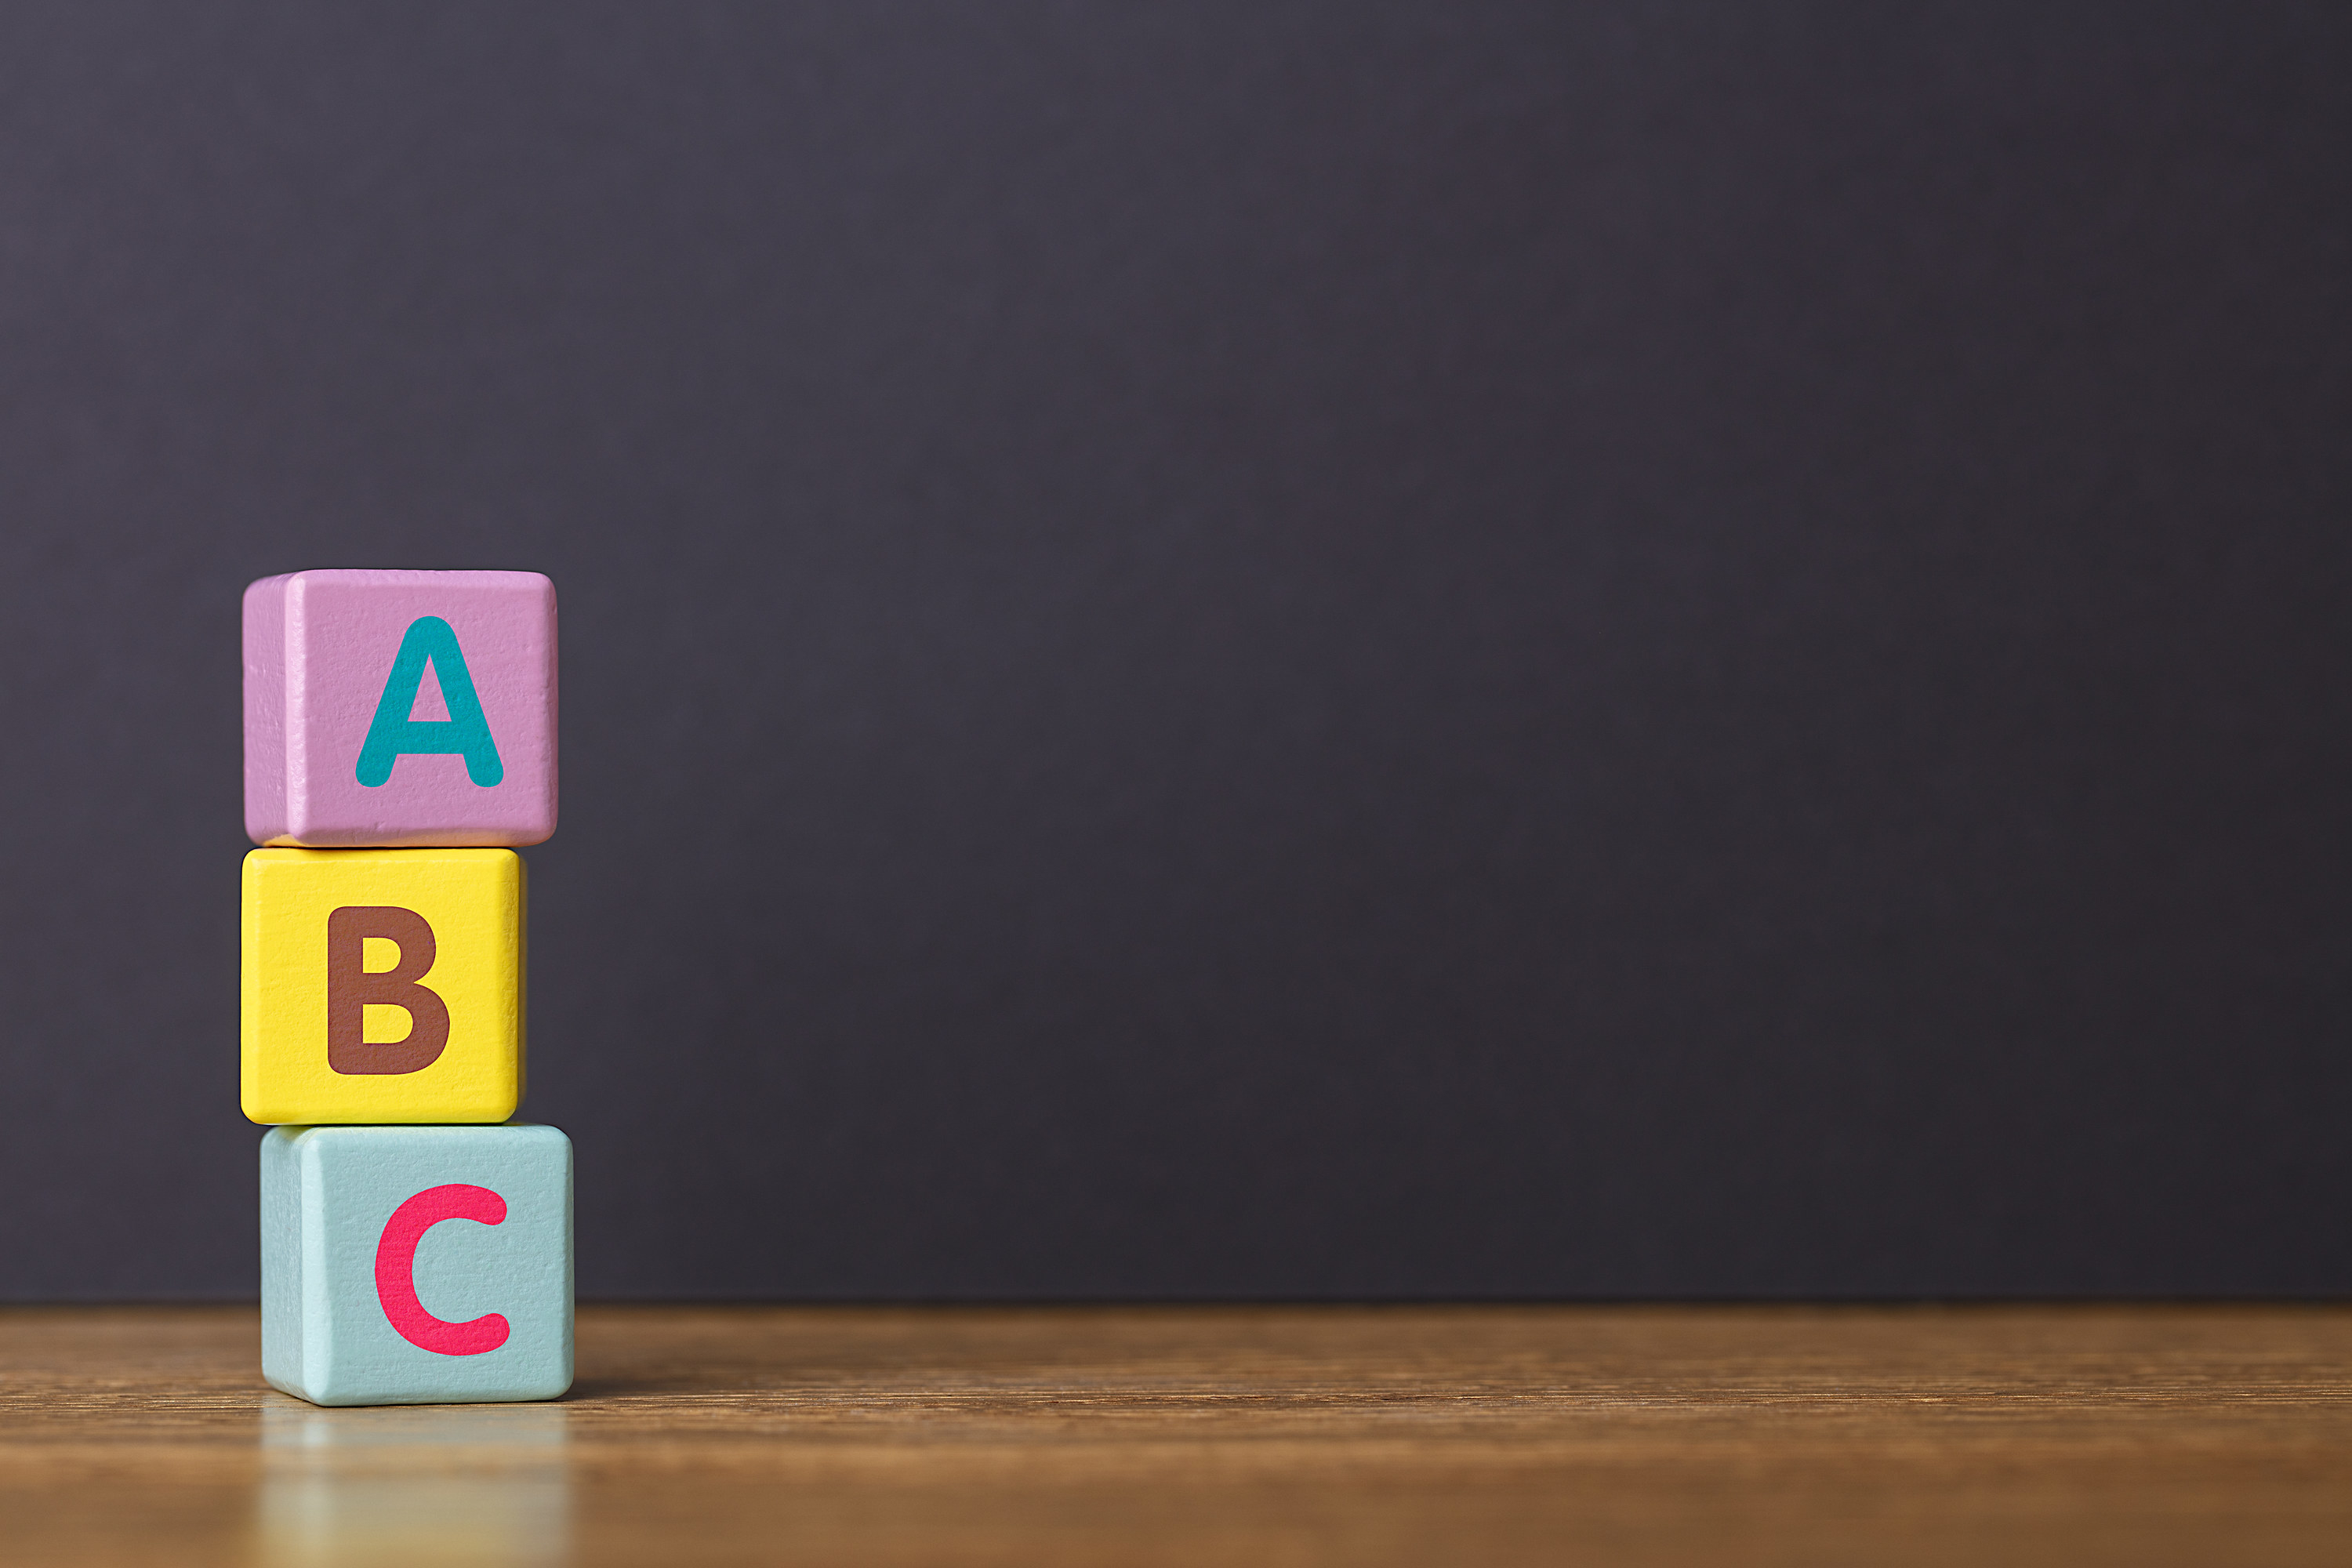 ABC letters alphabet on three toy blocks in pillar form on wooden table